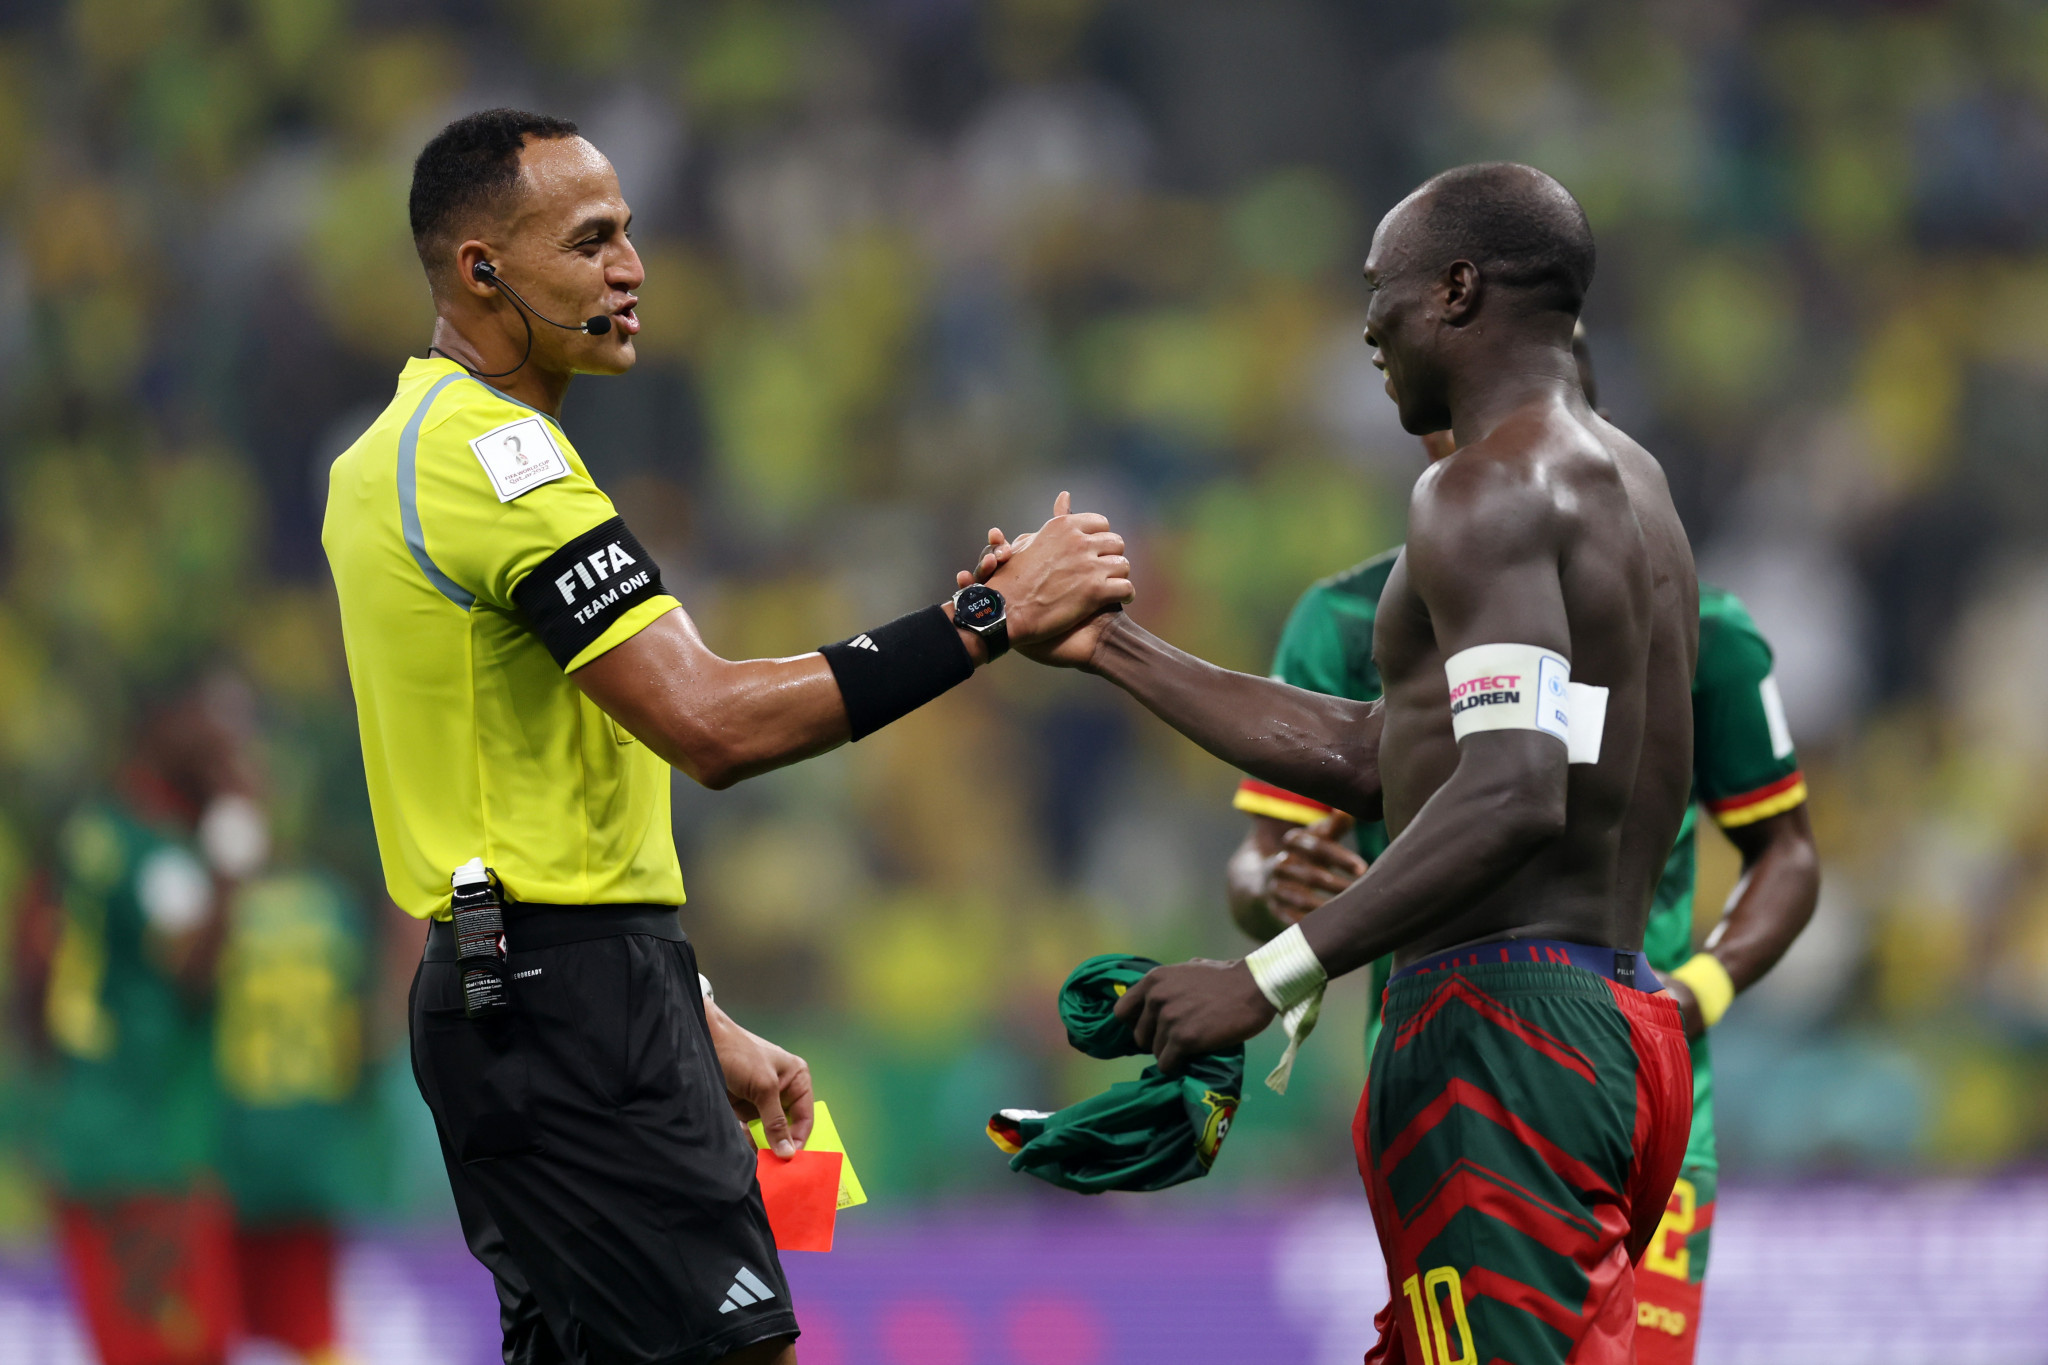 Vincent Aboubakar jovially shaking hands with the referee, who is about to send off the striker for a second yellow card after taking his shirt off ©Getty Images